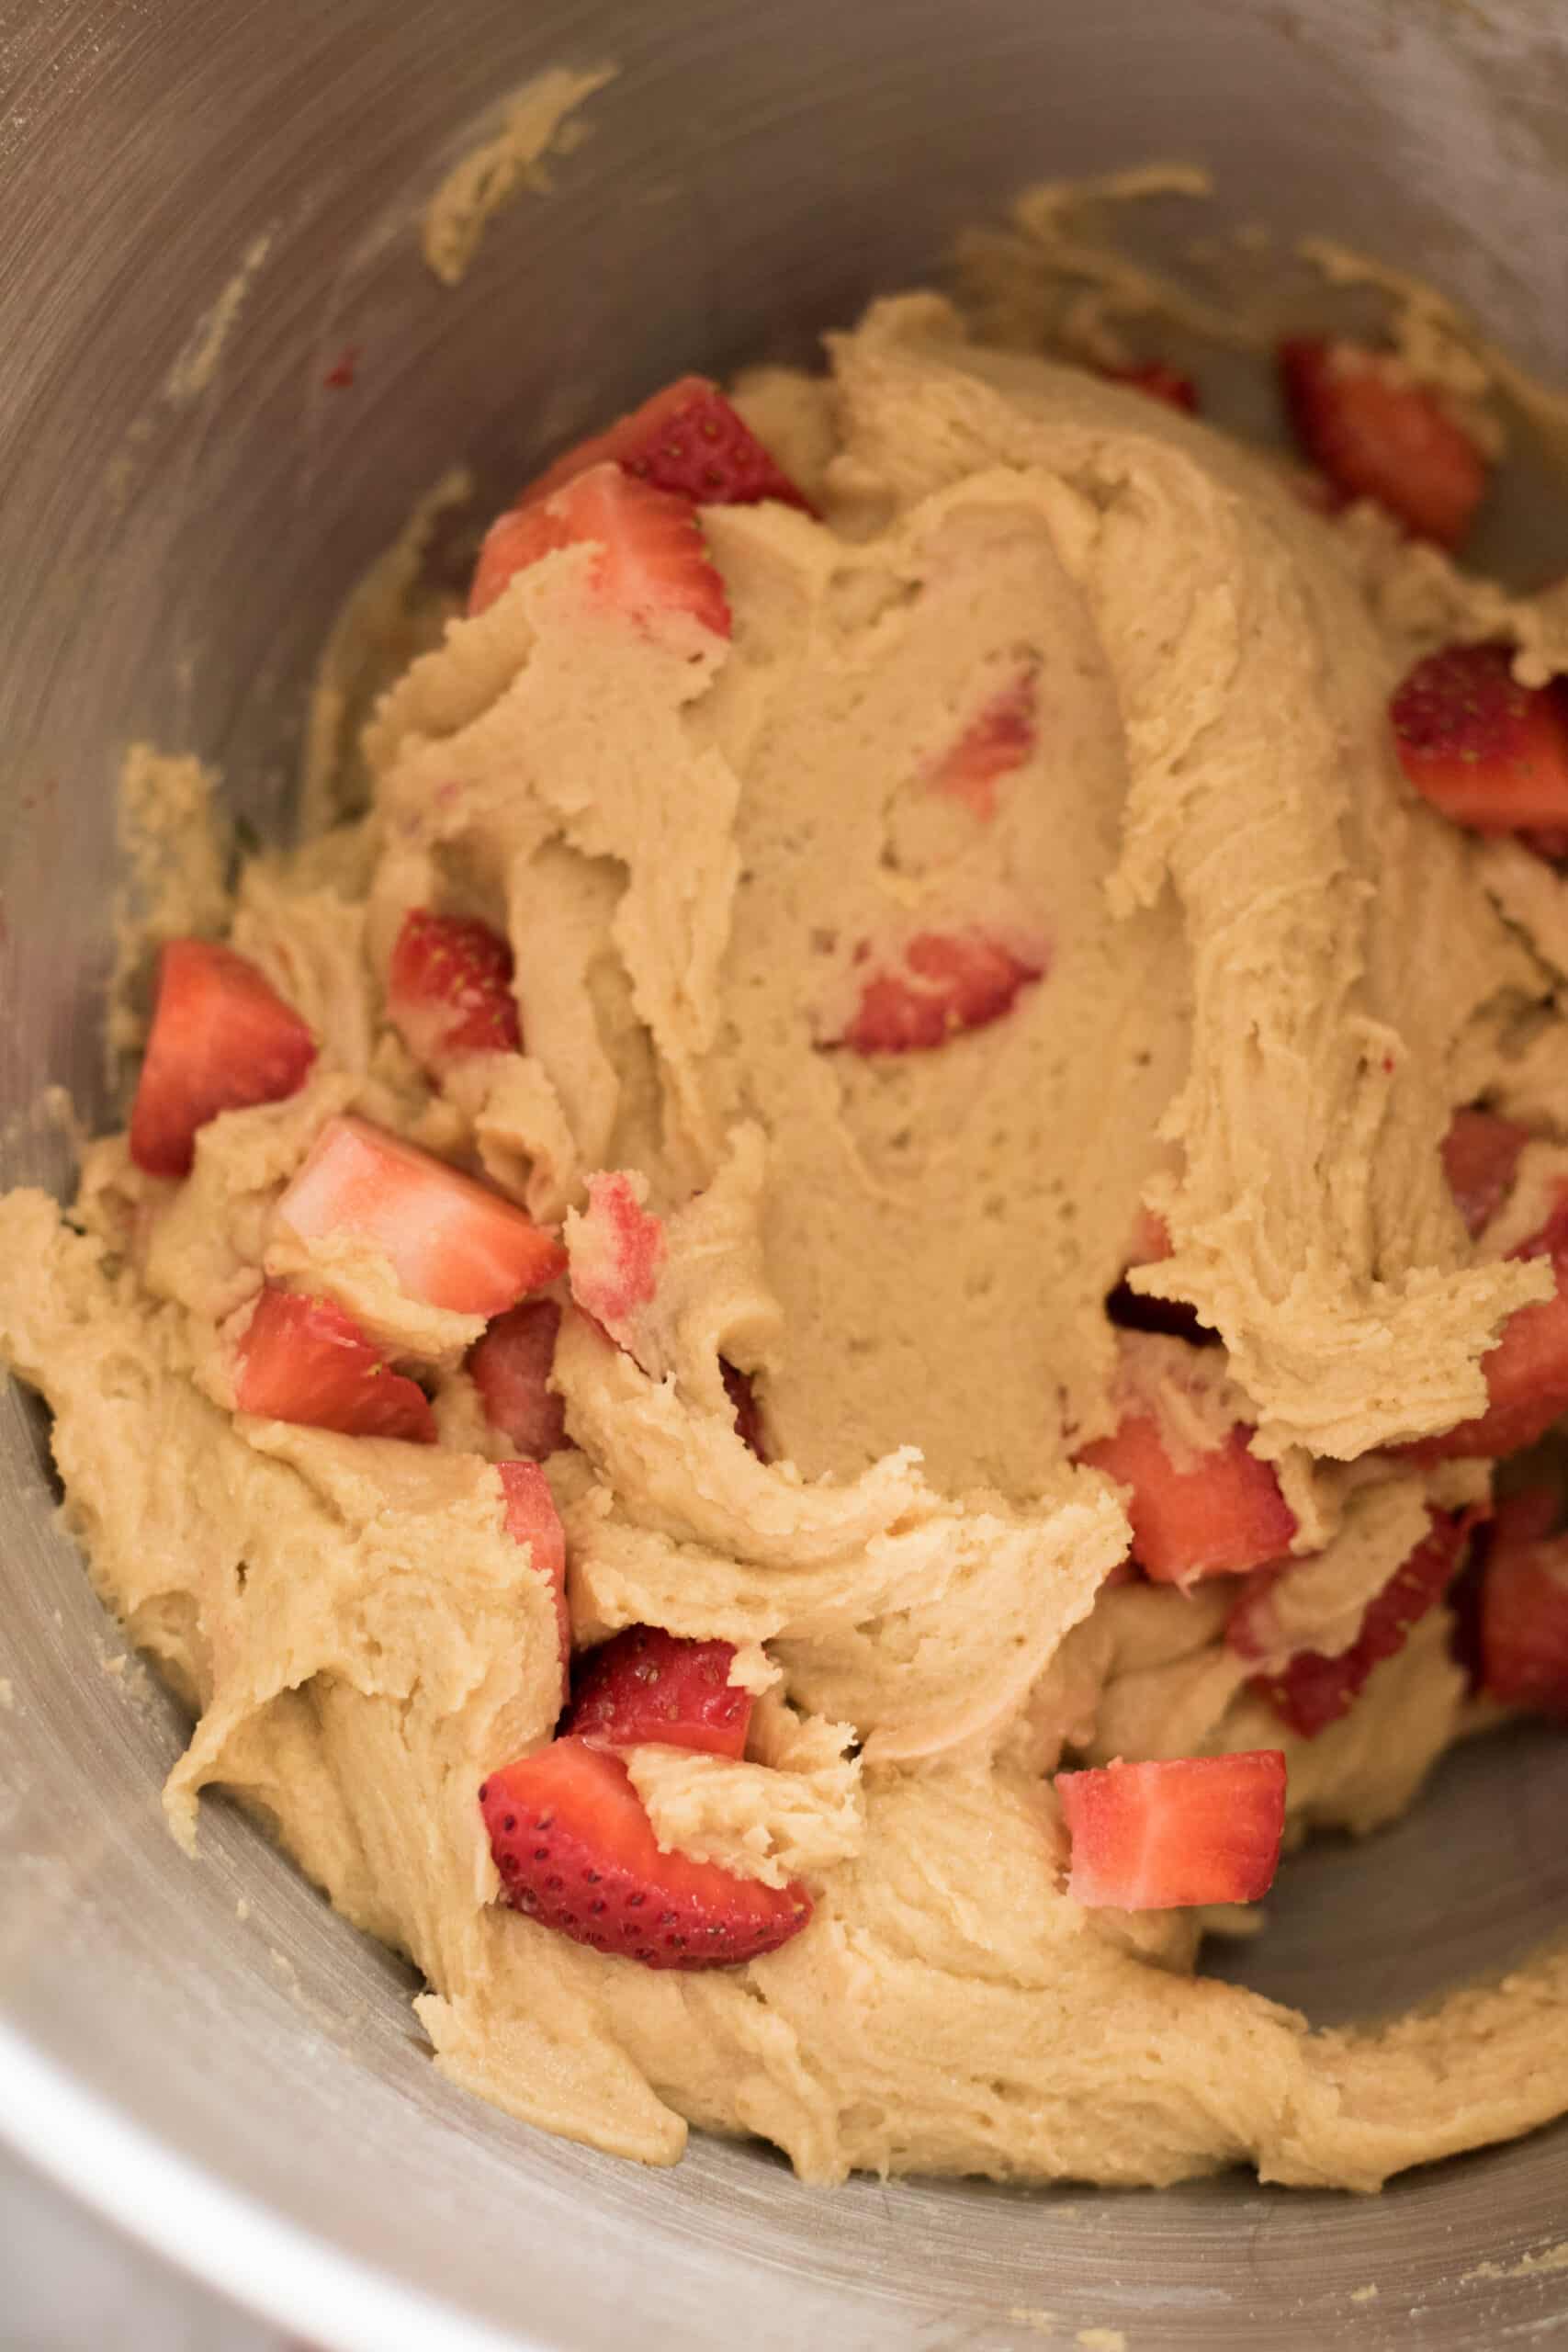 Strawberry blondie batter in mixing bowl